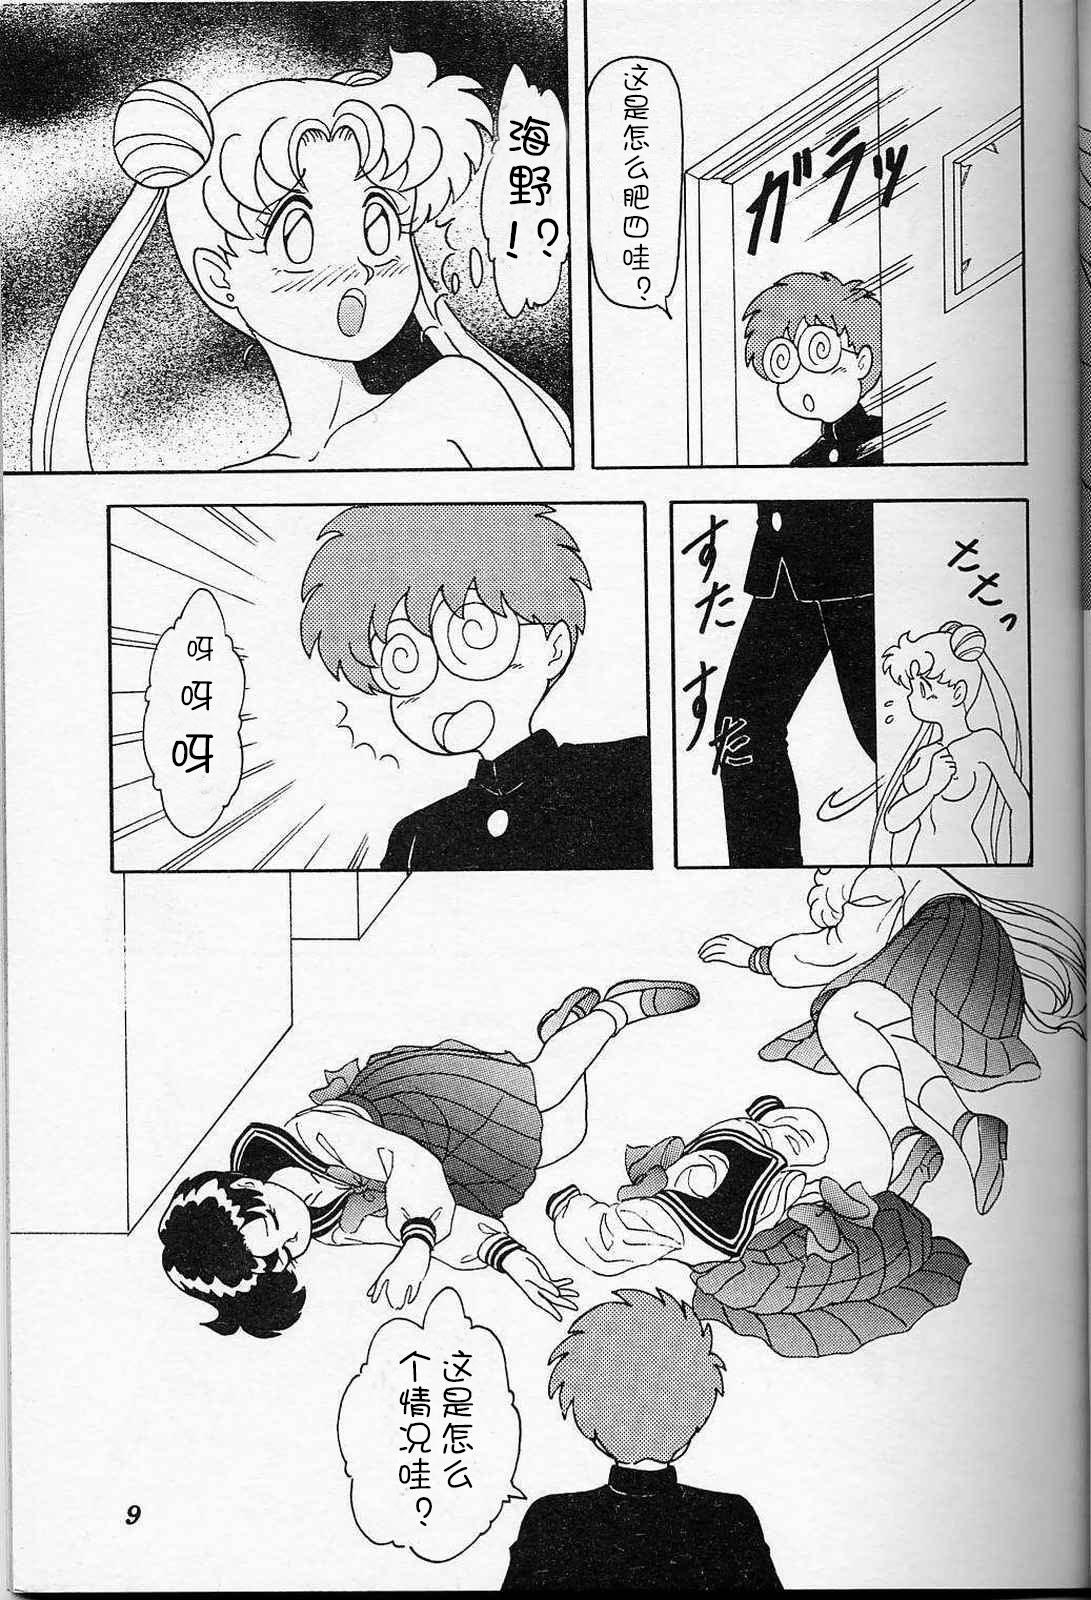 Ass Sex Lunch Box 6 - Usagi - Sailor moon Shaven - Page 8